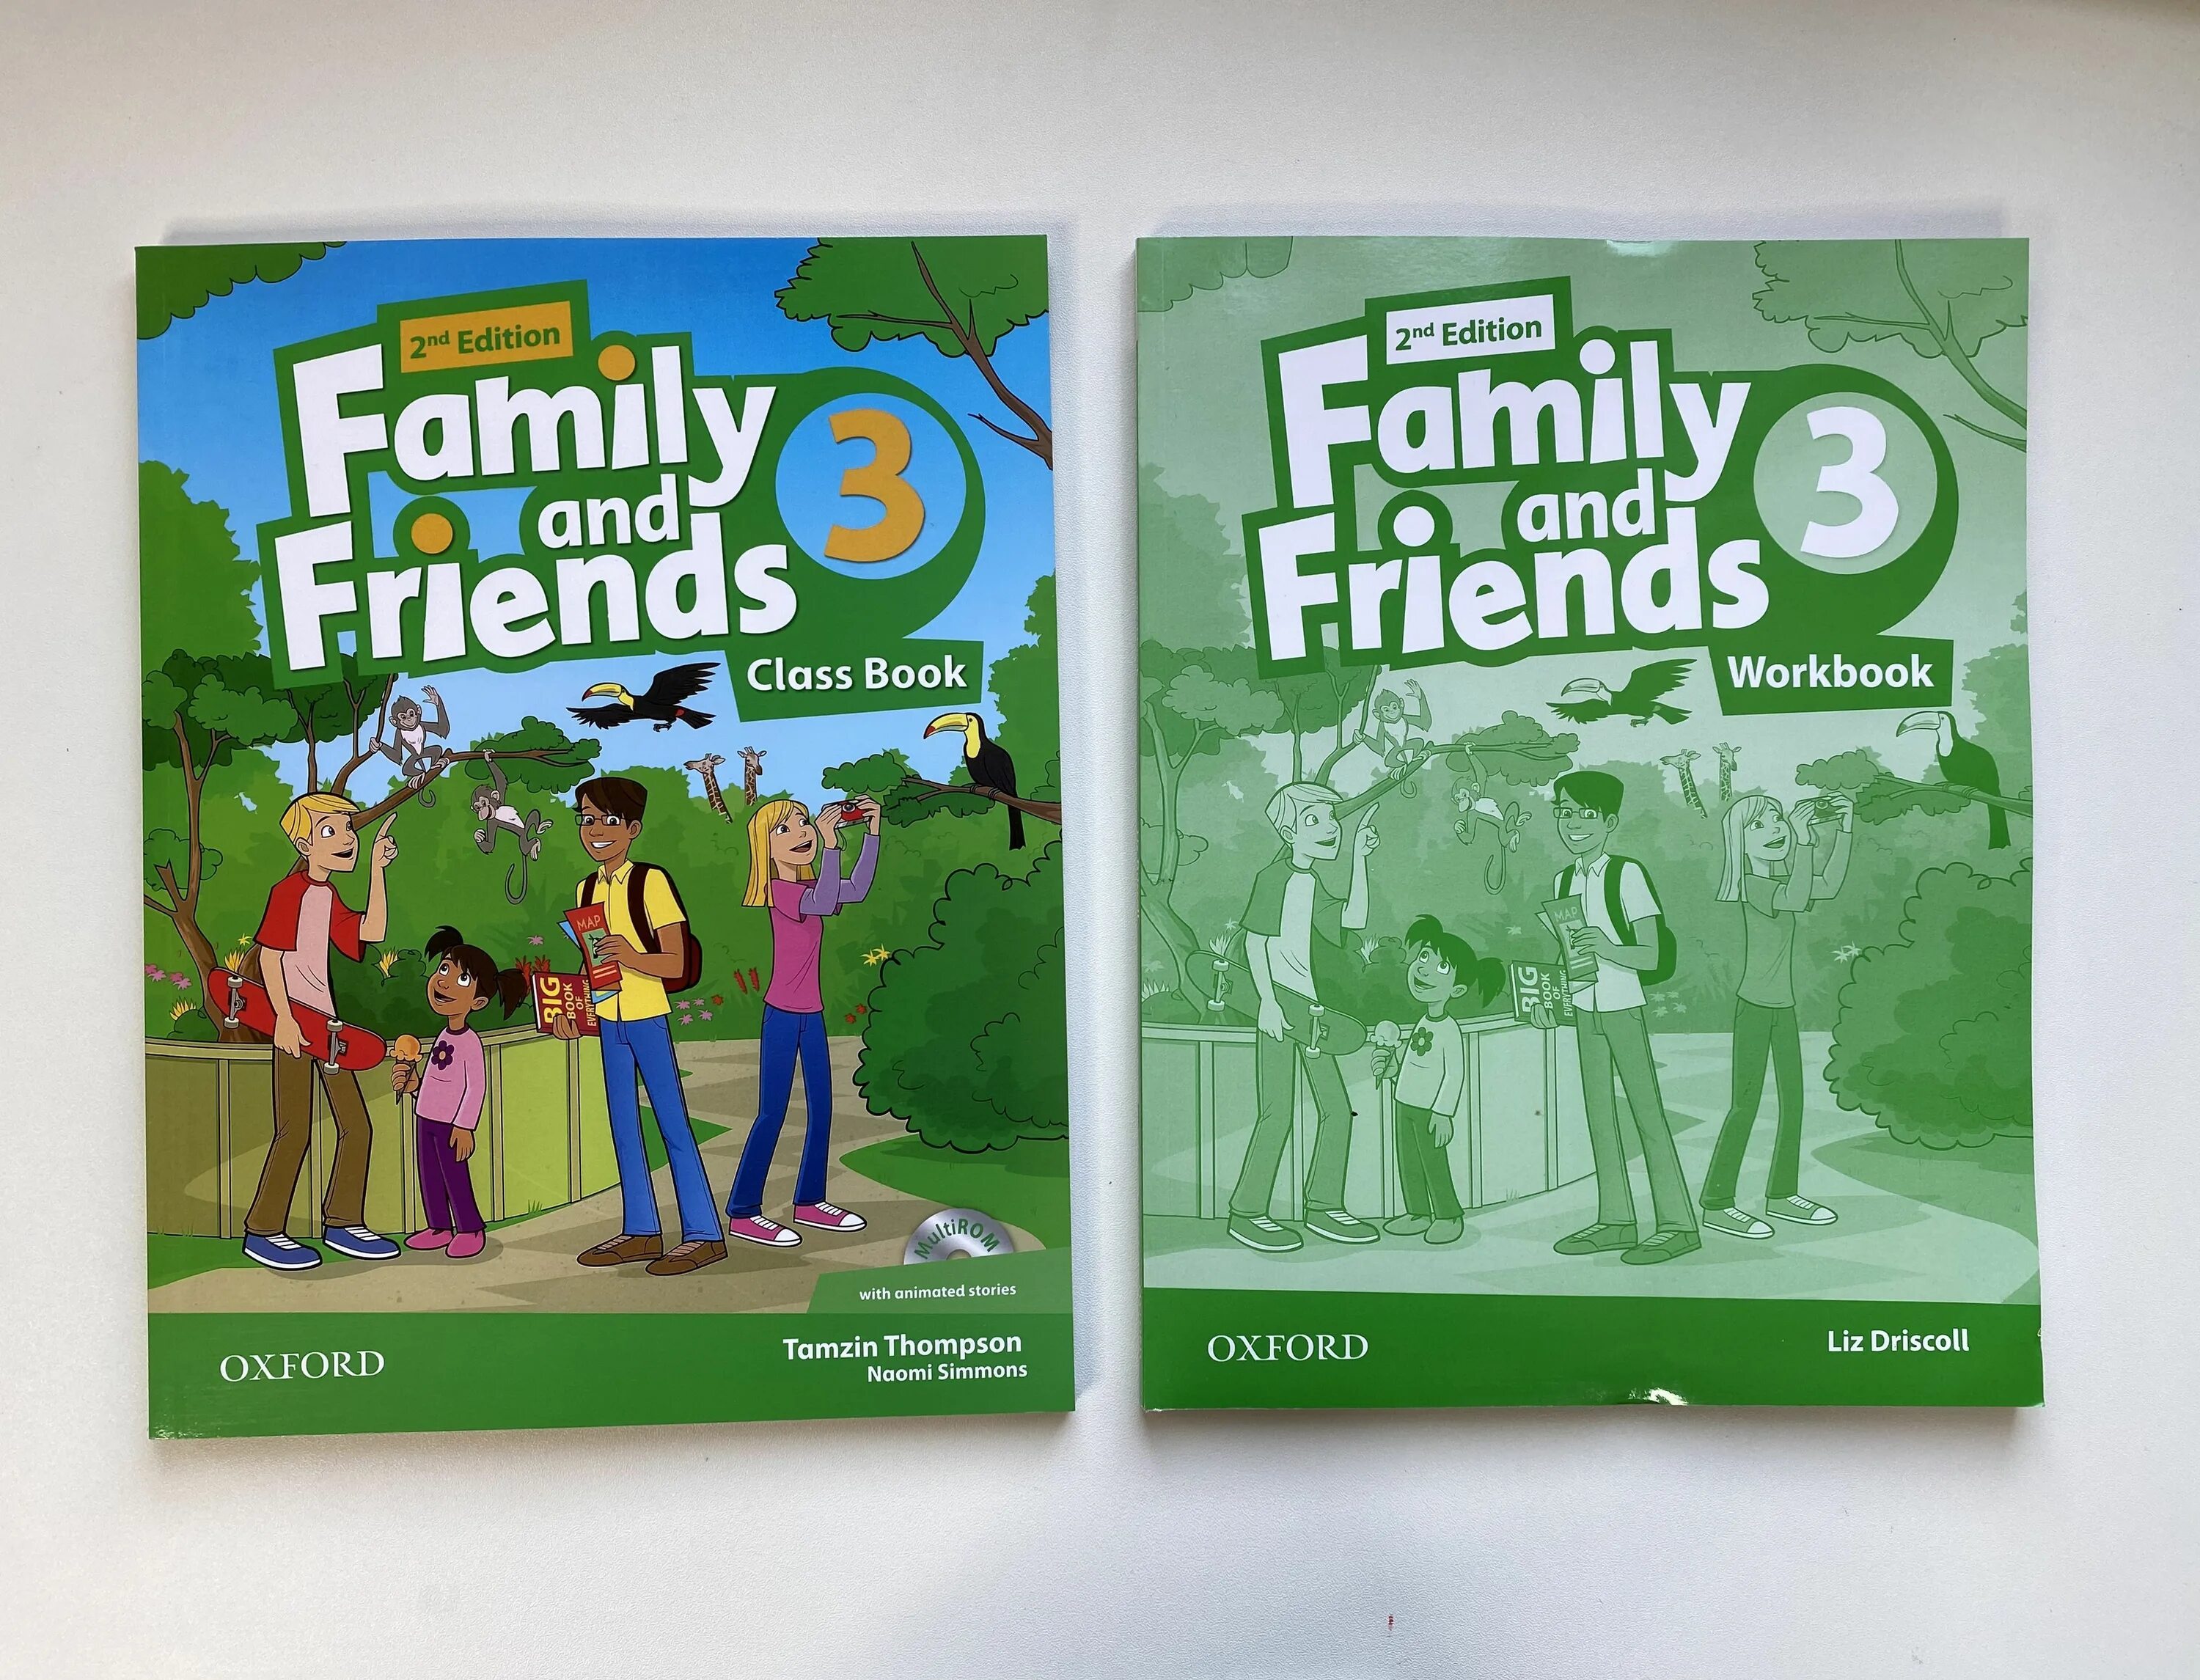 Family and friends starter book. Family and friends 2 class book и Workbook. Учебник Family and friends 3. Учебник Family and friends 1. Family and friends 1 class book.